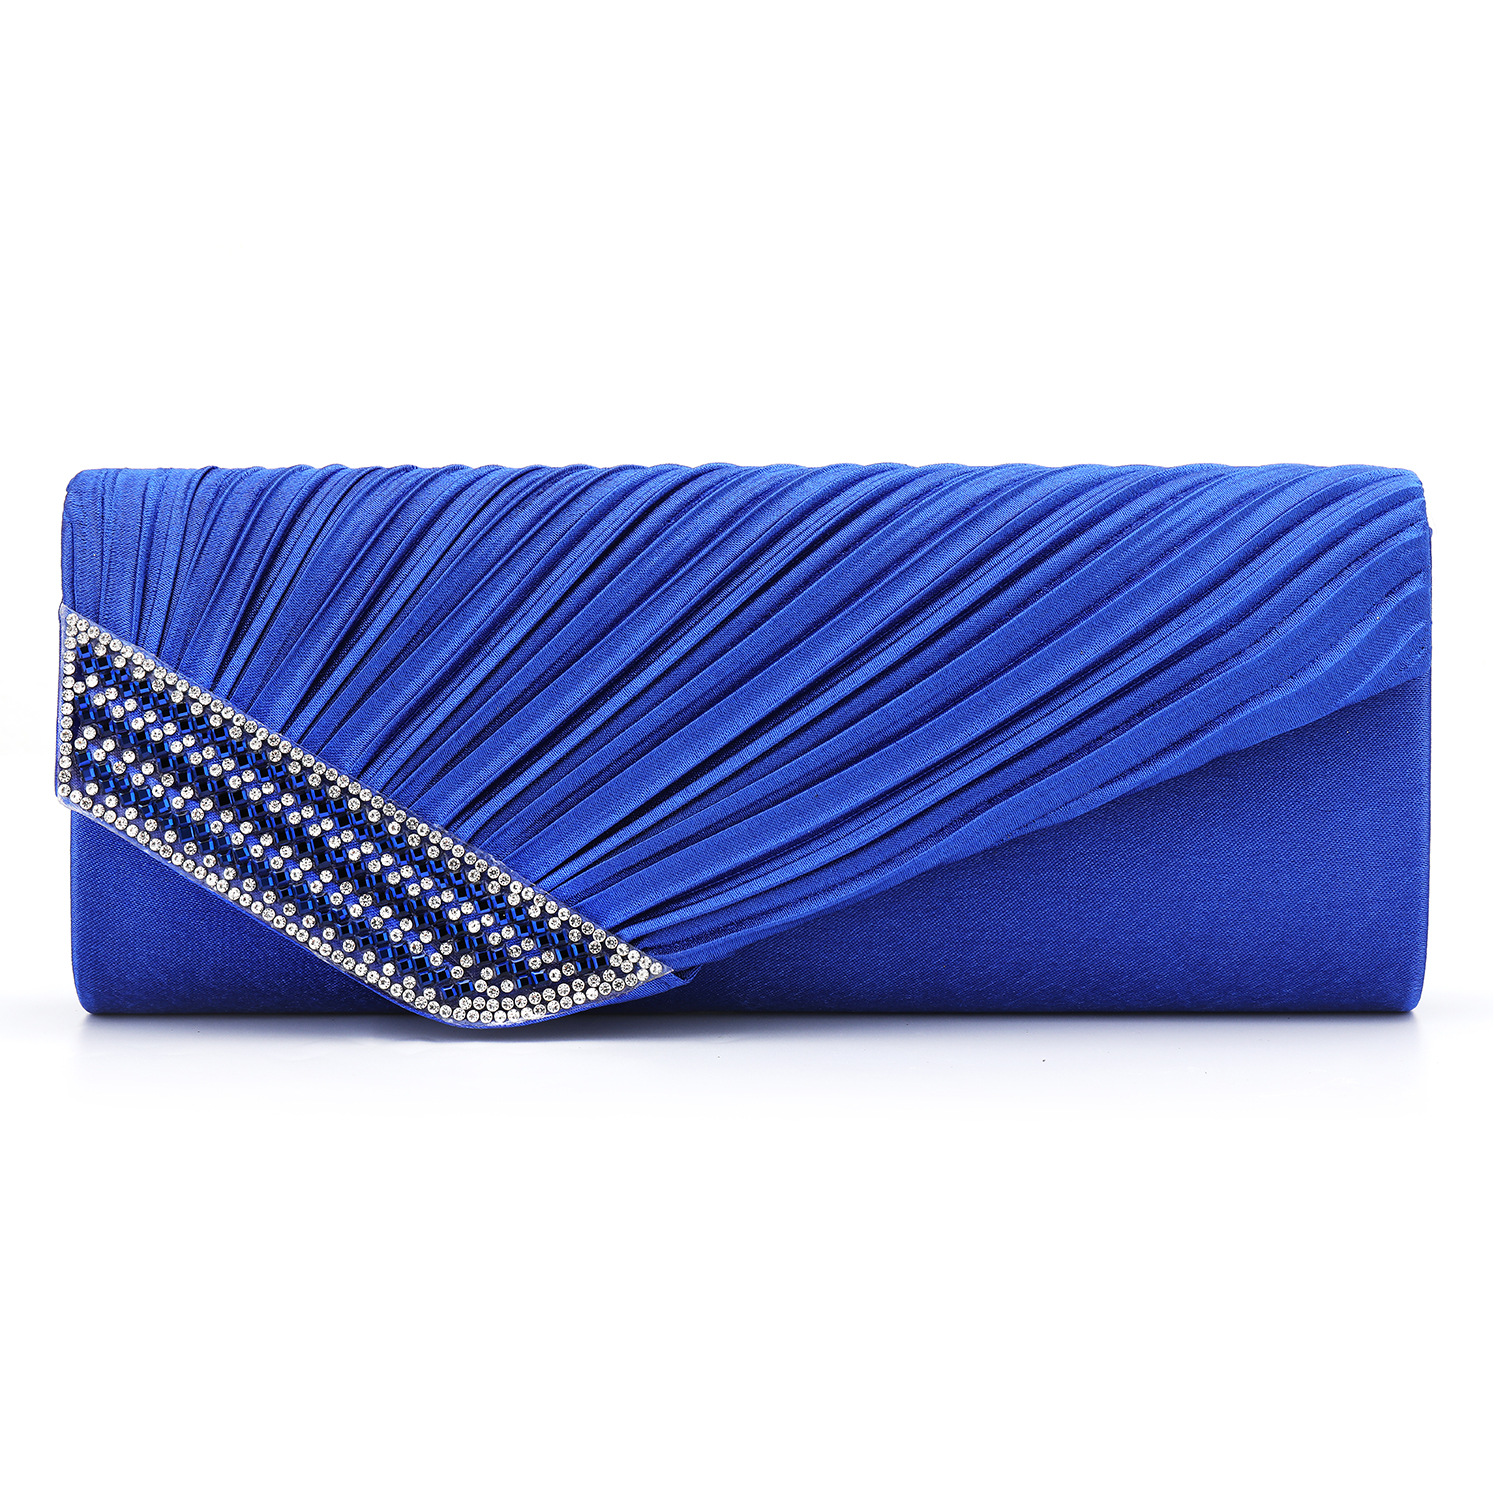 A new style pleated ribbon Diamond Satin dinner gift bag issued on behalf of Amazon clutch bag1210